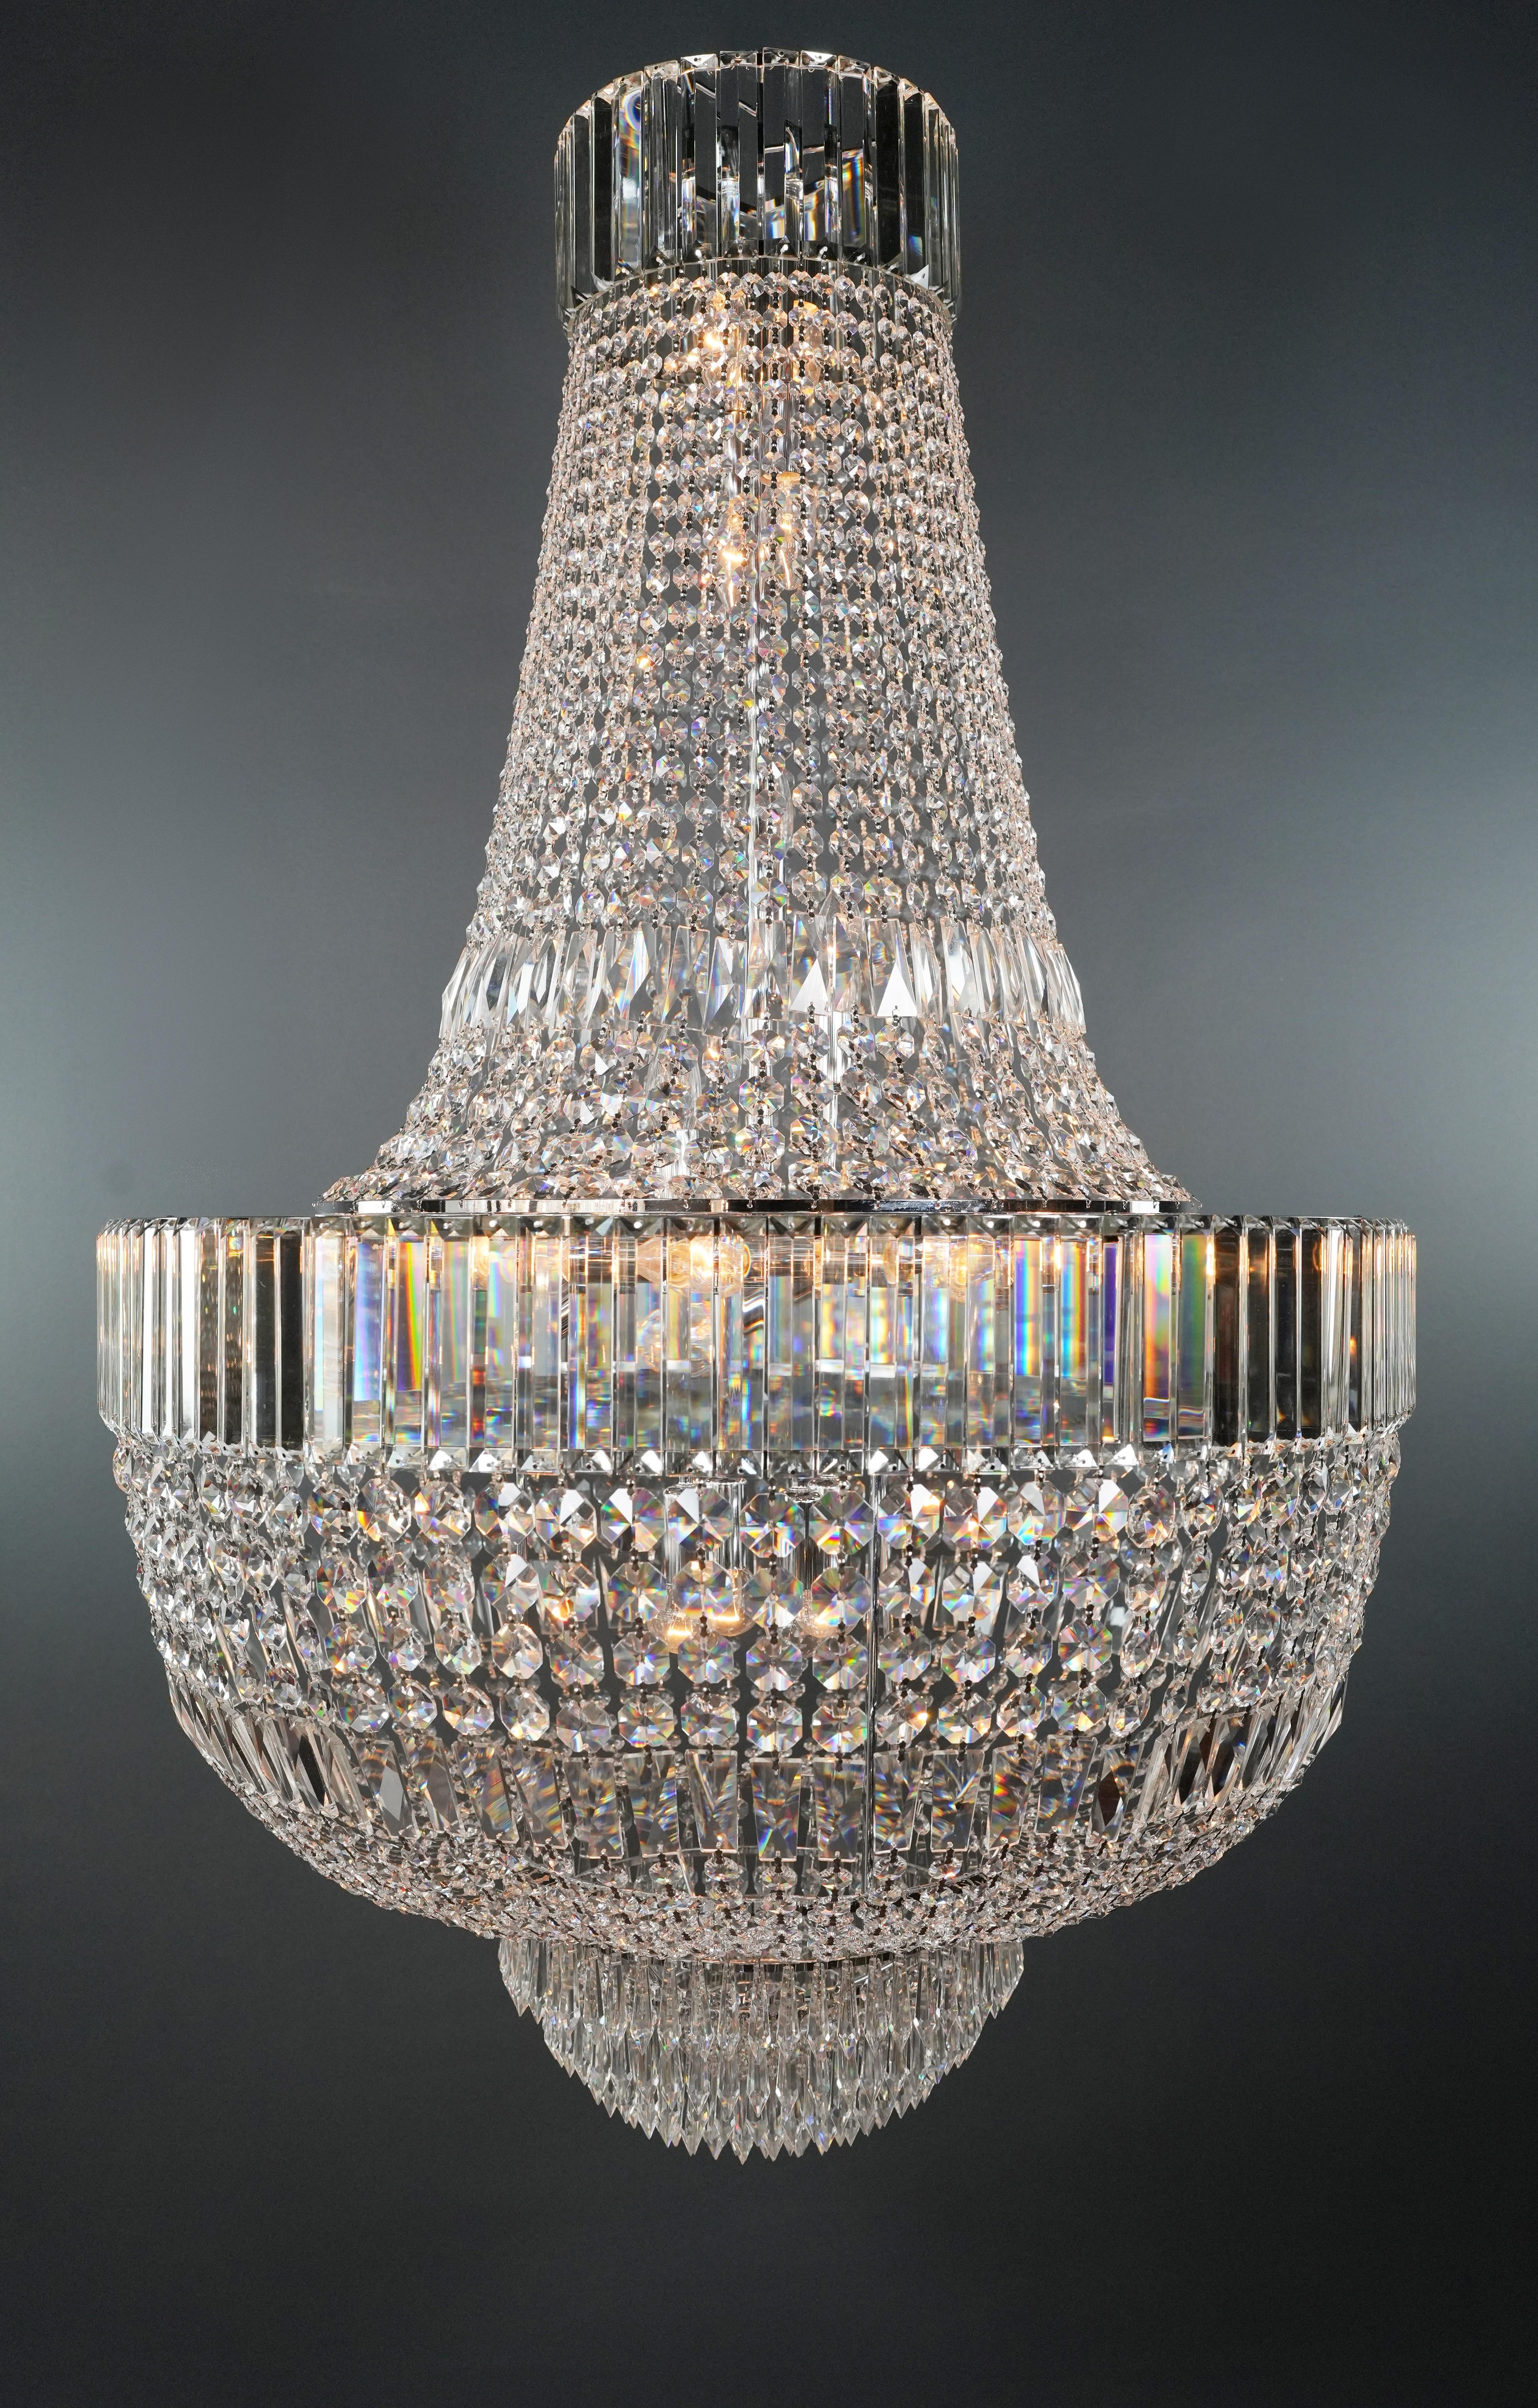 New Art Deco Crystal Style Chandelier: Custom Empire Elegance

Introducing our latest addition, the Art Deco crystal style chandelier, a captivating fusion of Empire opulence and the brilliance of lead crystal. Crafted in-house with meticulous care,